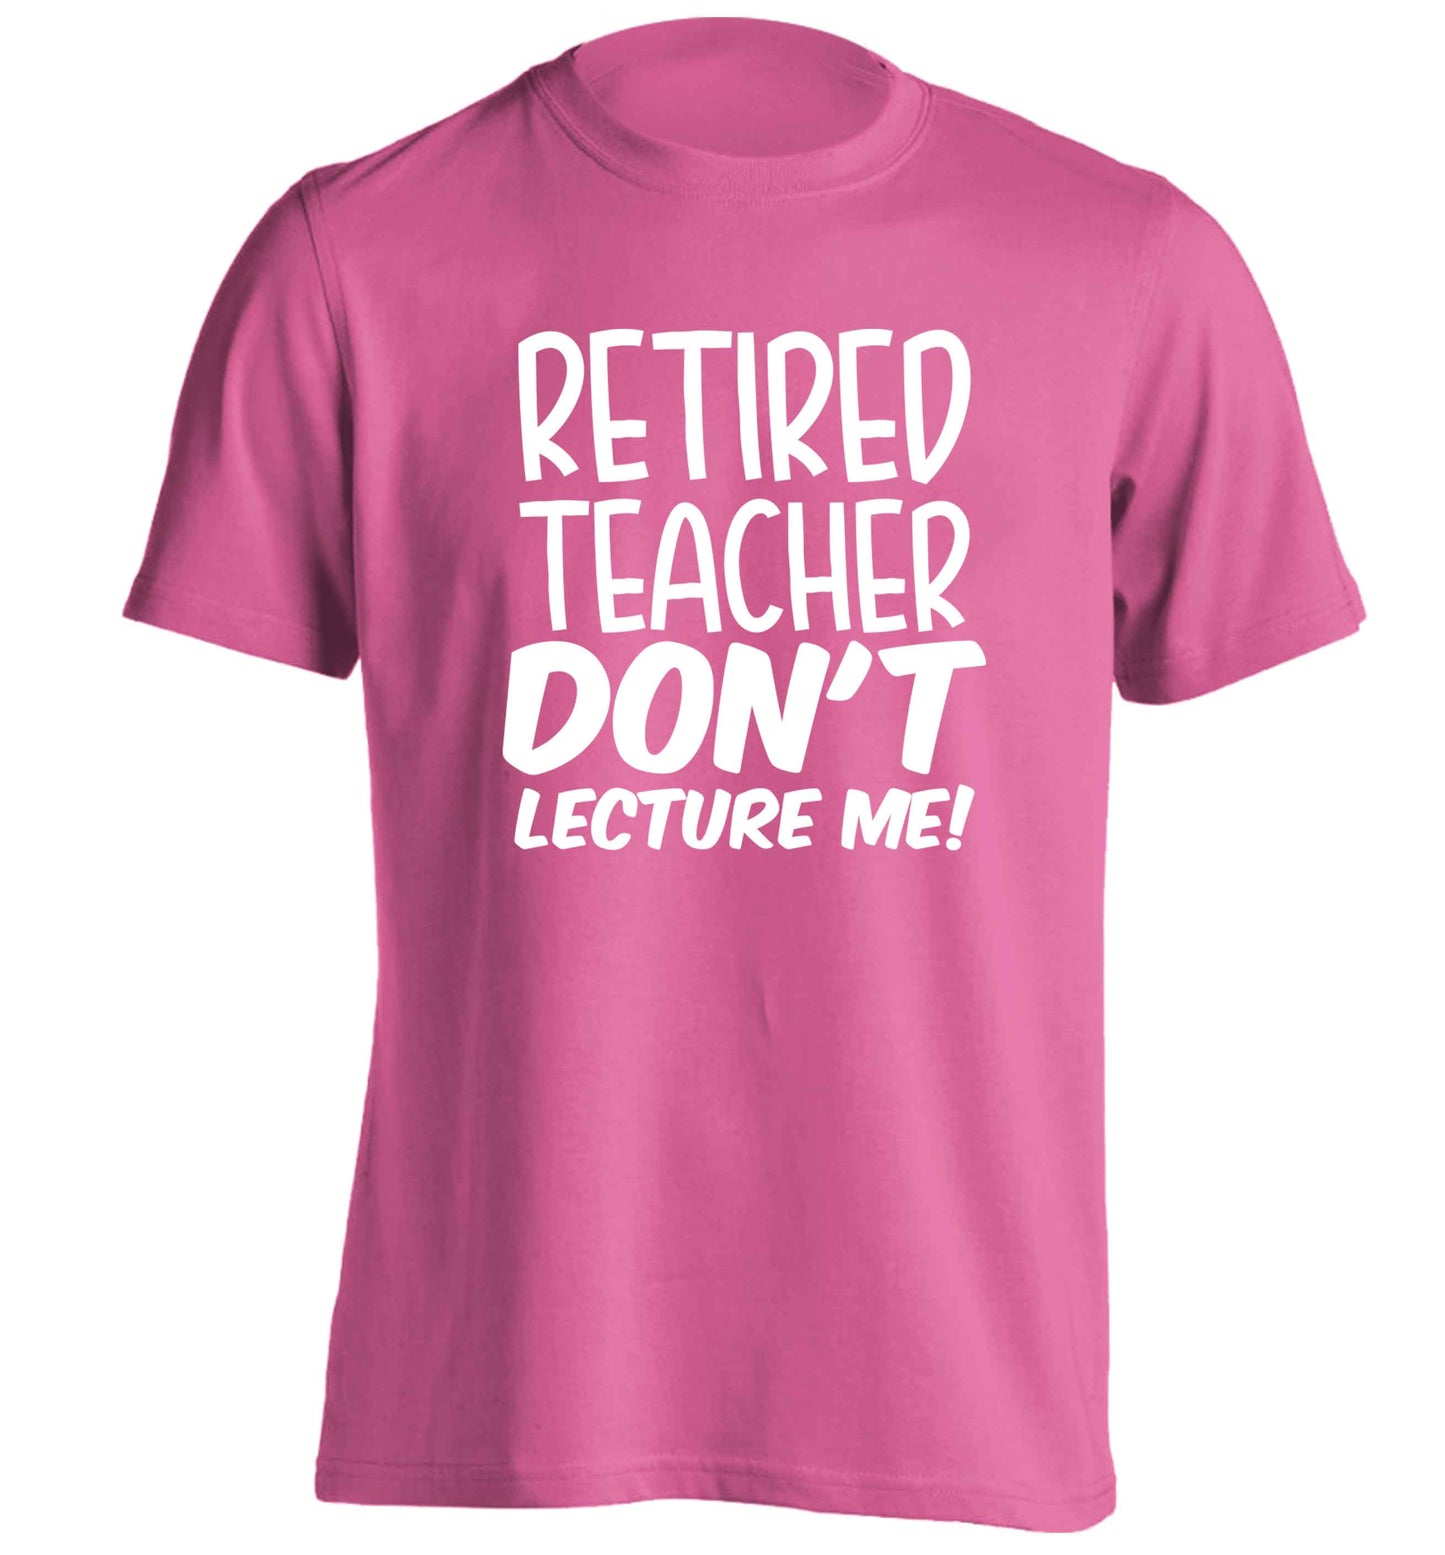 Retired teacher don't lecture me! adults unisex pink Tshirt 2XL